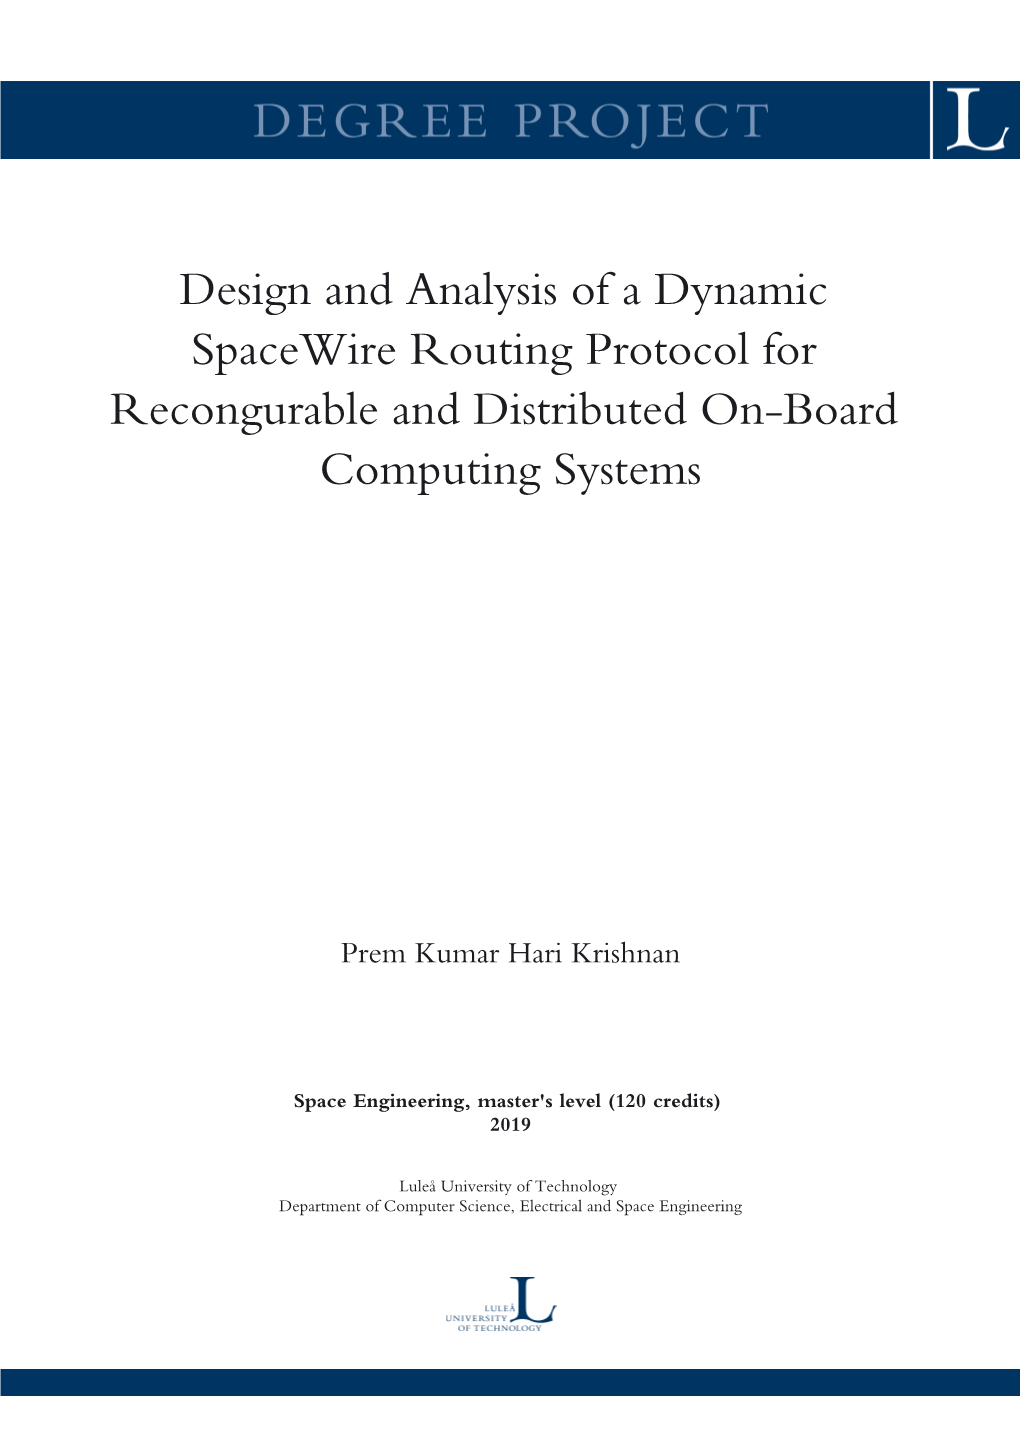 Design and Analysis of a Dynamic Spacewire Routing Protocol for Recongurable and Distributed On-Board Computing Systems